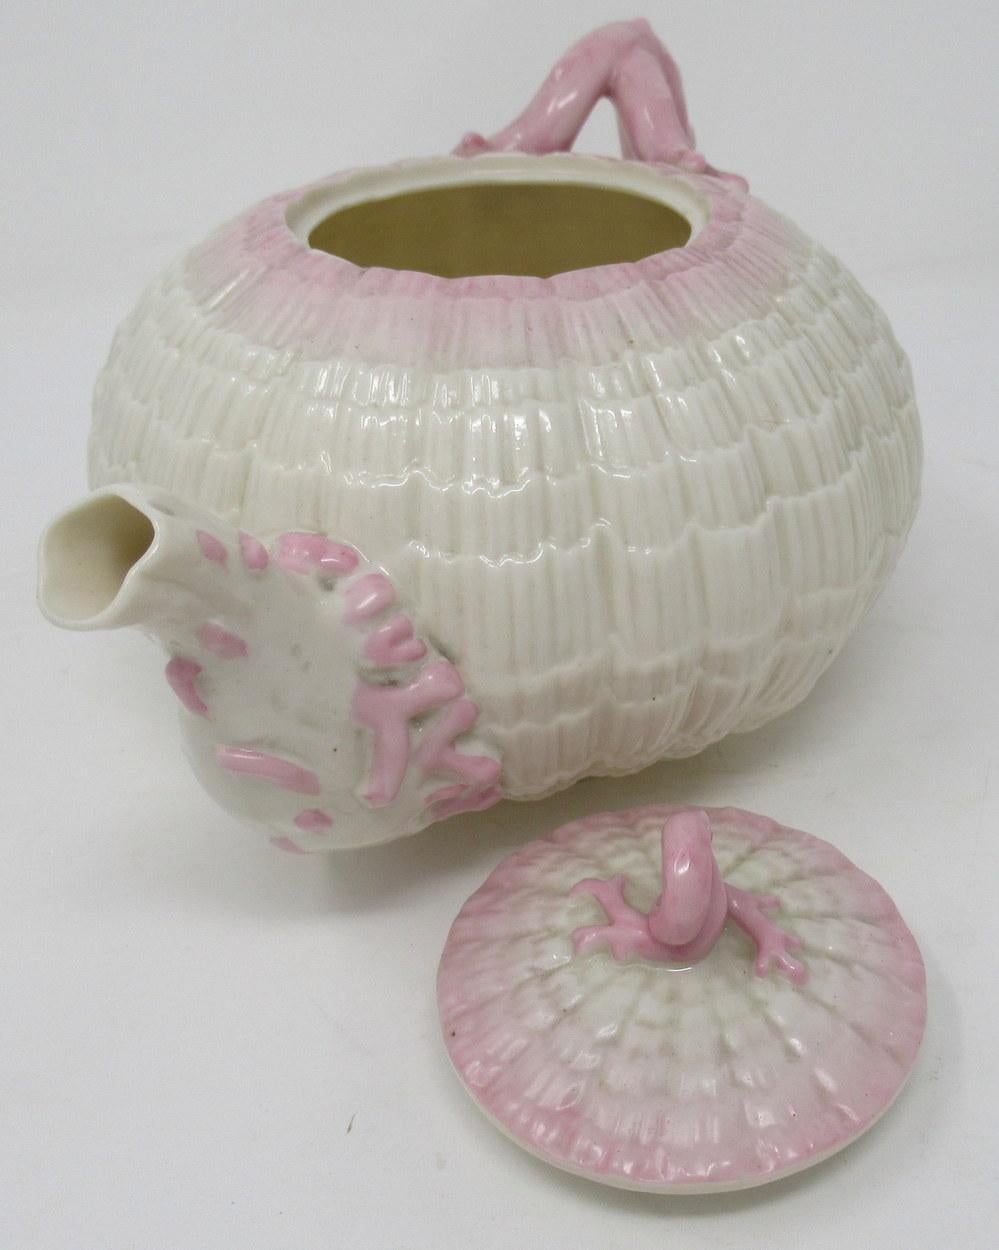 Early Irish Belleek Porcelain Tridanca tea pot with textured body and stylish almond pink wash detail. Complete with original firm fitting cover with a finial, together with matching cream jug and sugar bowl. 

First period black mark for